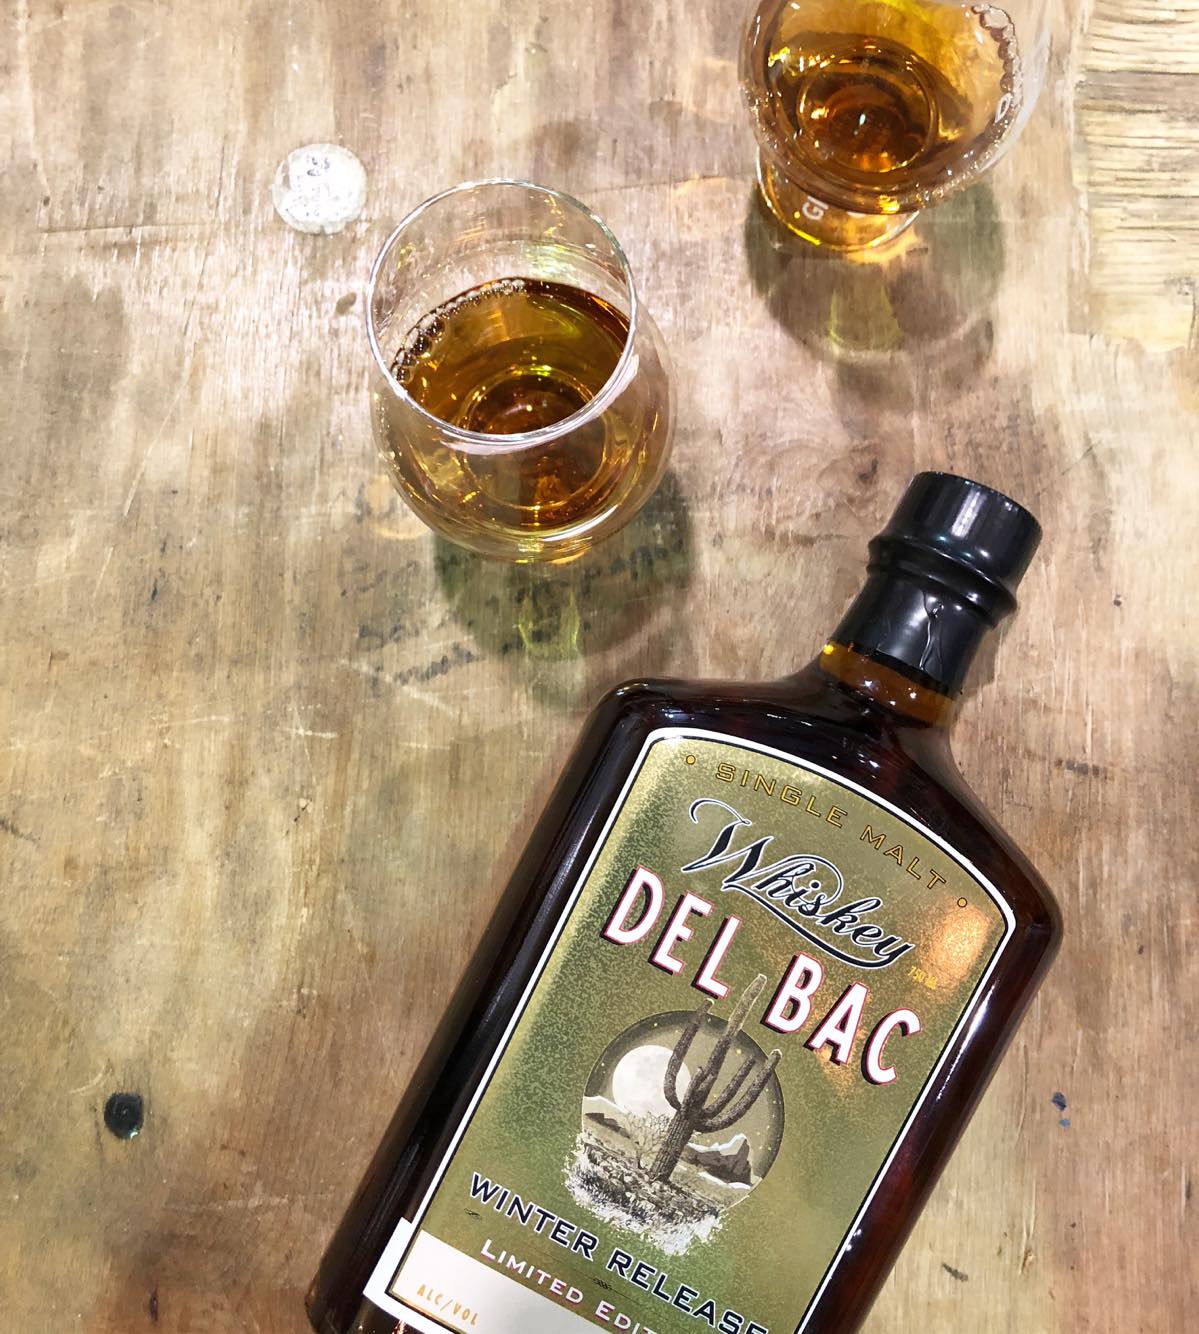 Limited Edition Whiskey Del Bac 2018 Winter Release (Credit: Melissa Stihl)